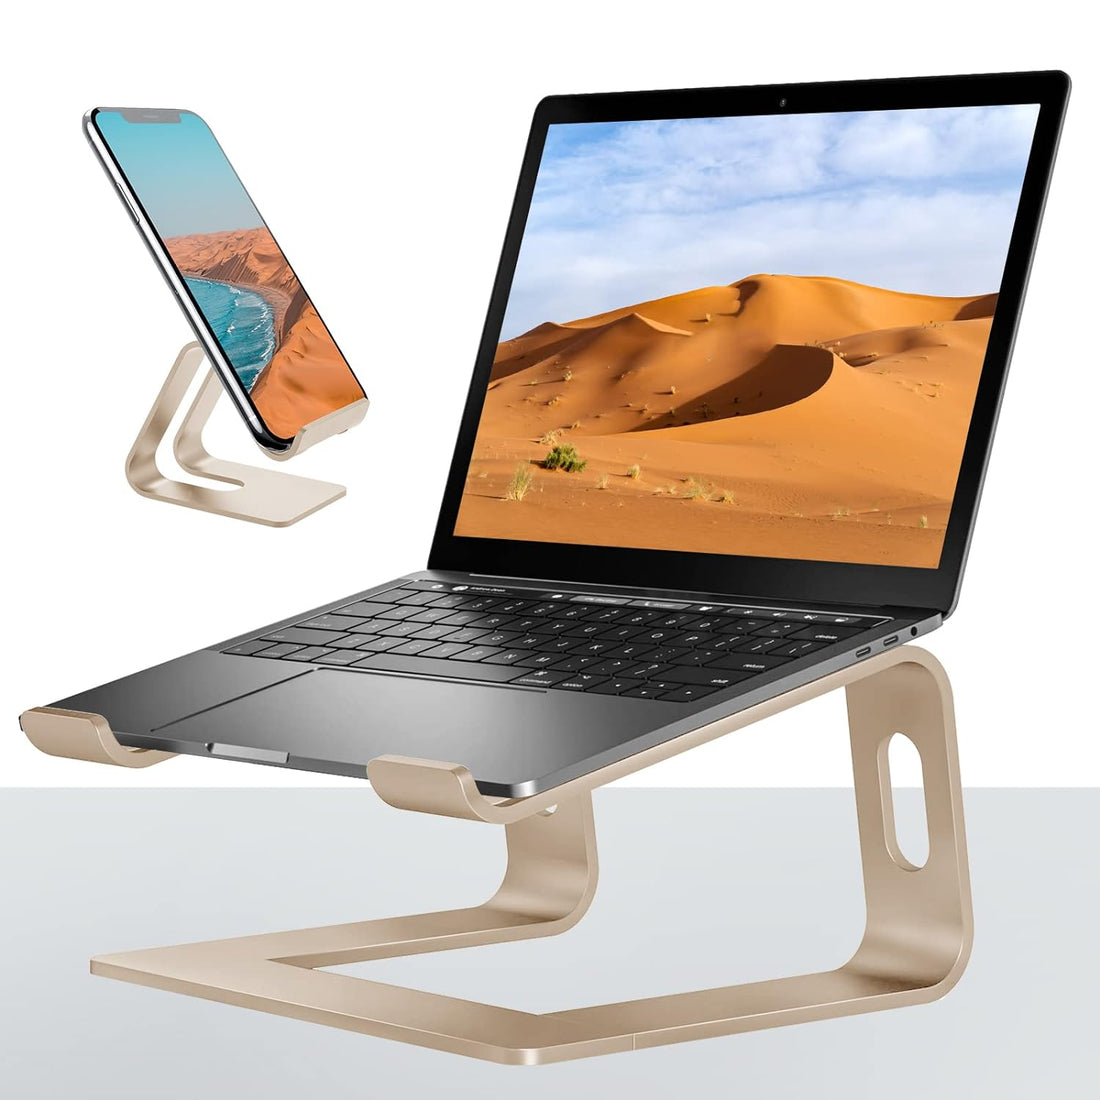 VOCOFO Laptop Stand for Desk Aluminum Laptop Riser Holder,with Cell Phone Stand(Gold)